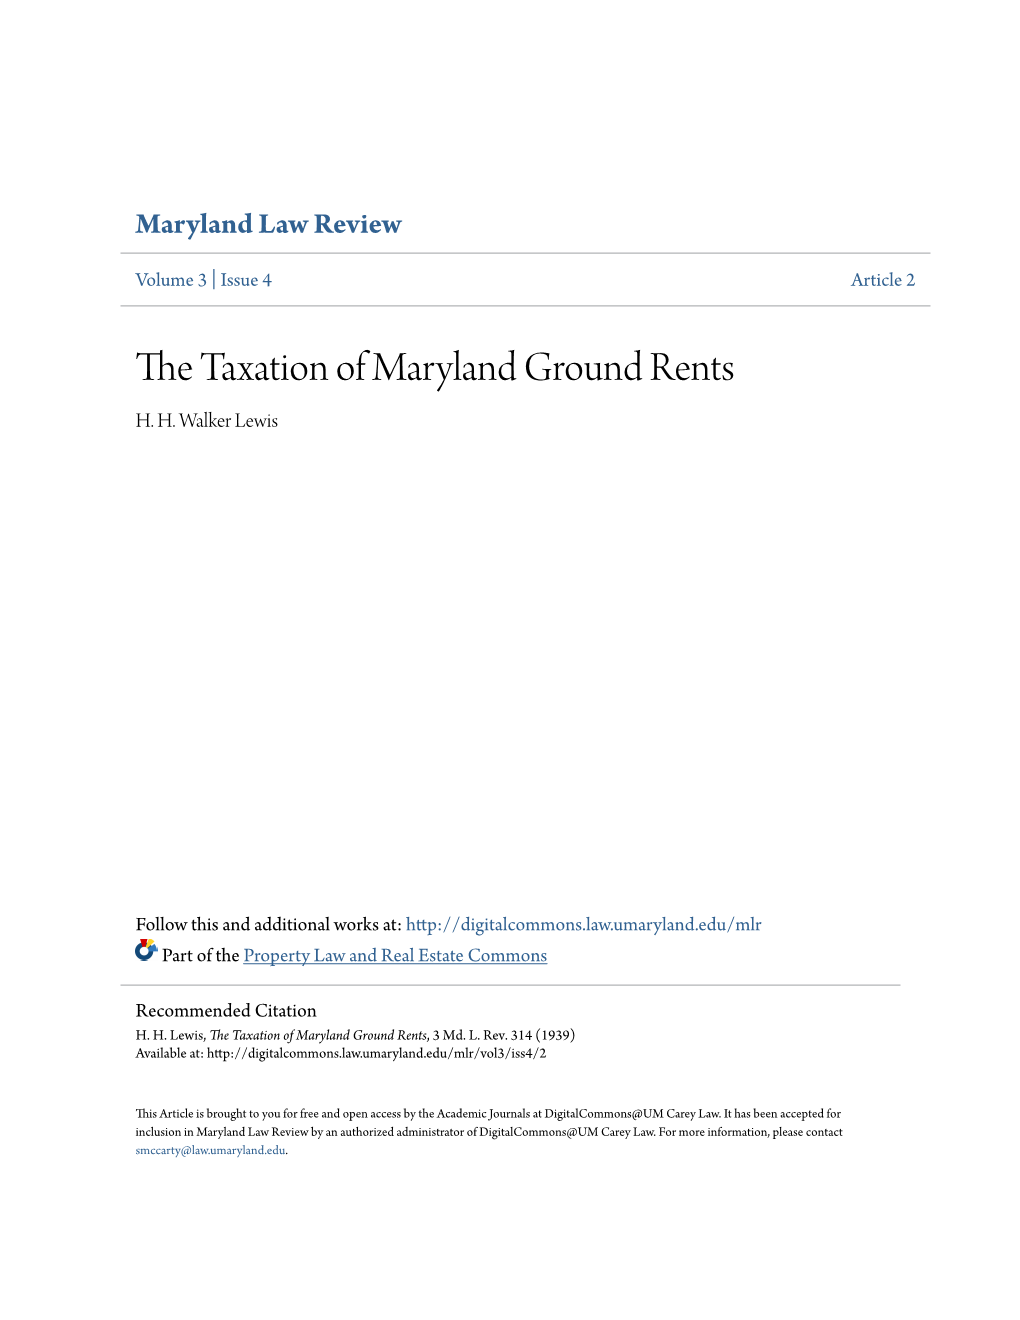 The Taxation of Maryland Ground Rents, 3 Md